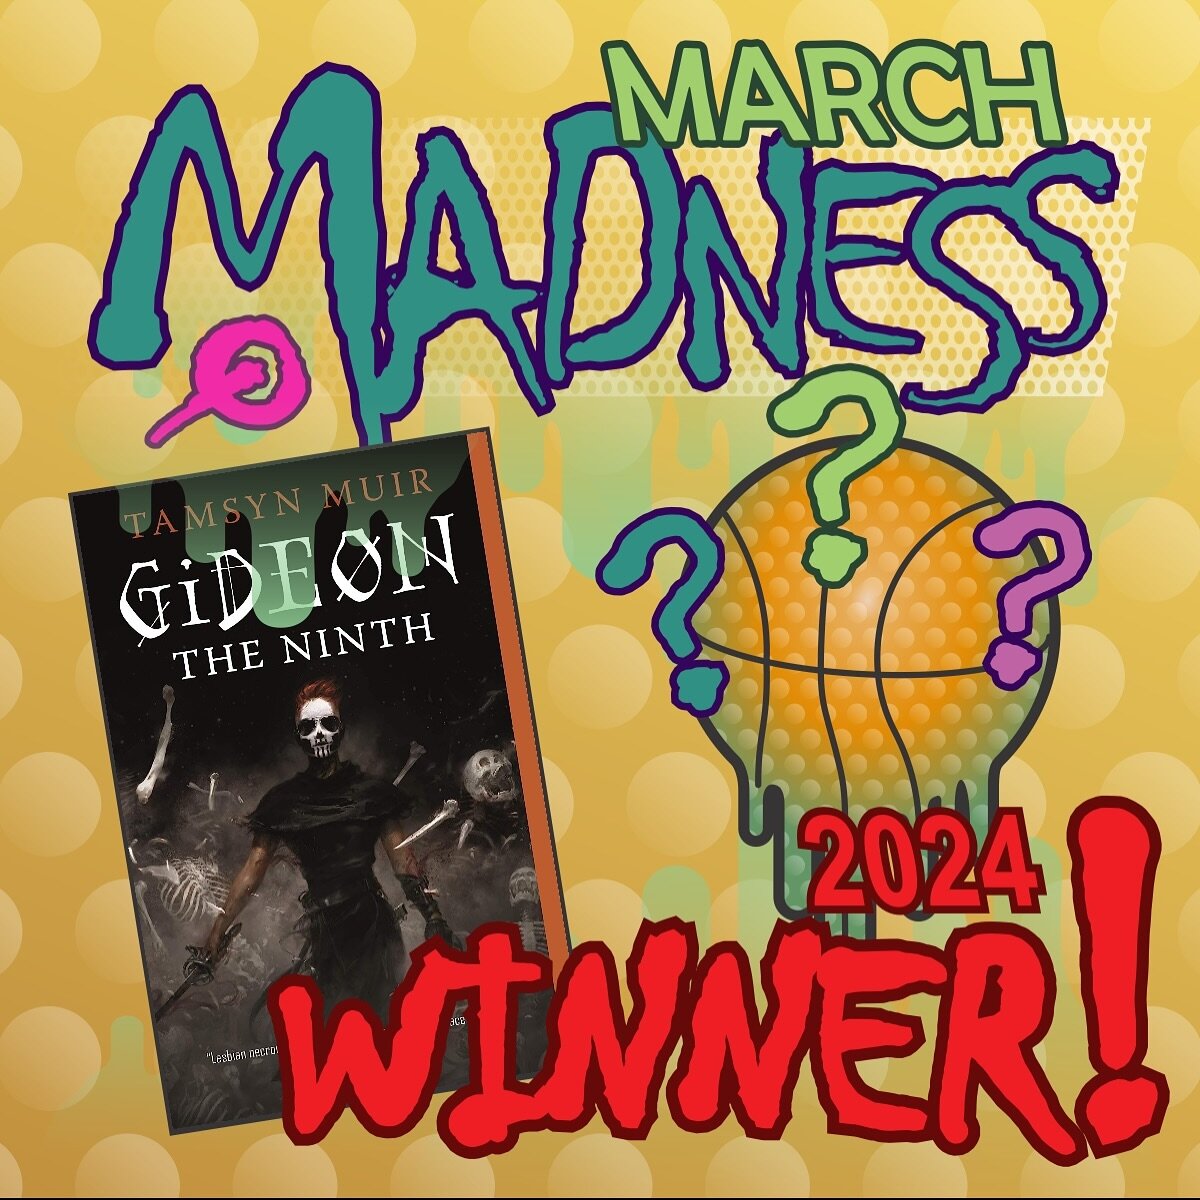 It&rsquo;s a GIDEON THE NINTH sweep! We knew you had it in you, Gideon Nav. 💀 CONGRATS TO THE CHAMP.

All the nominations are from our bracket are available for free through QLL&rsquo;s @libby.app collection. Check &lsquo;em out and get reading: htt